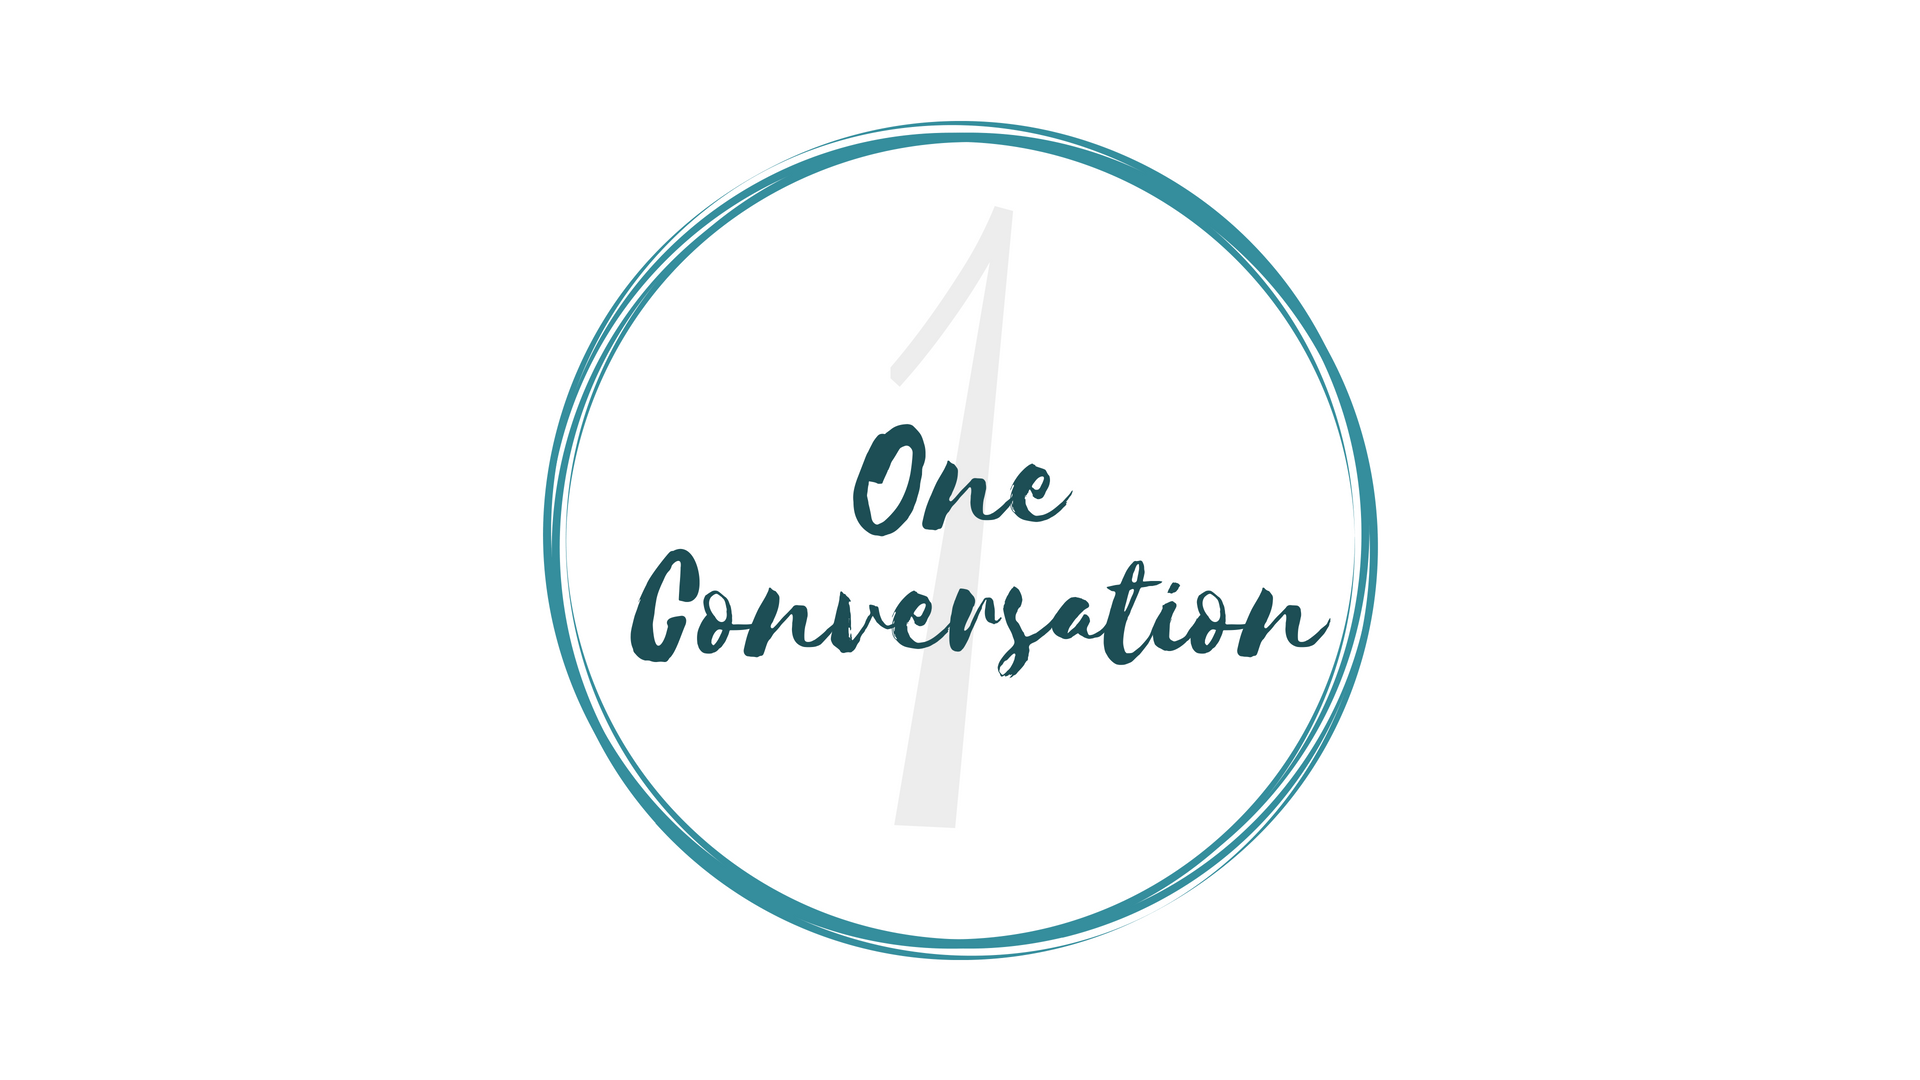 Eavesdrop On this “One Conversation” – Part 1